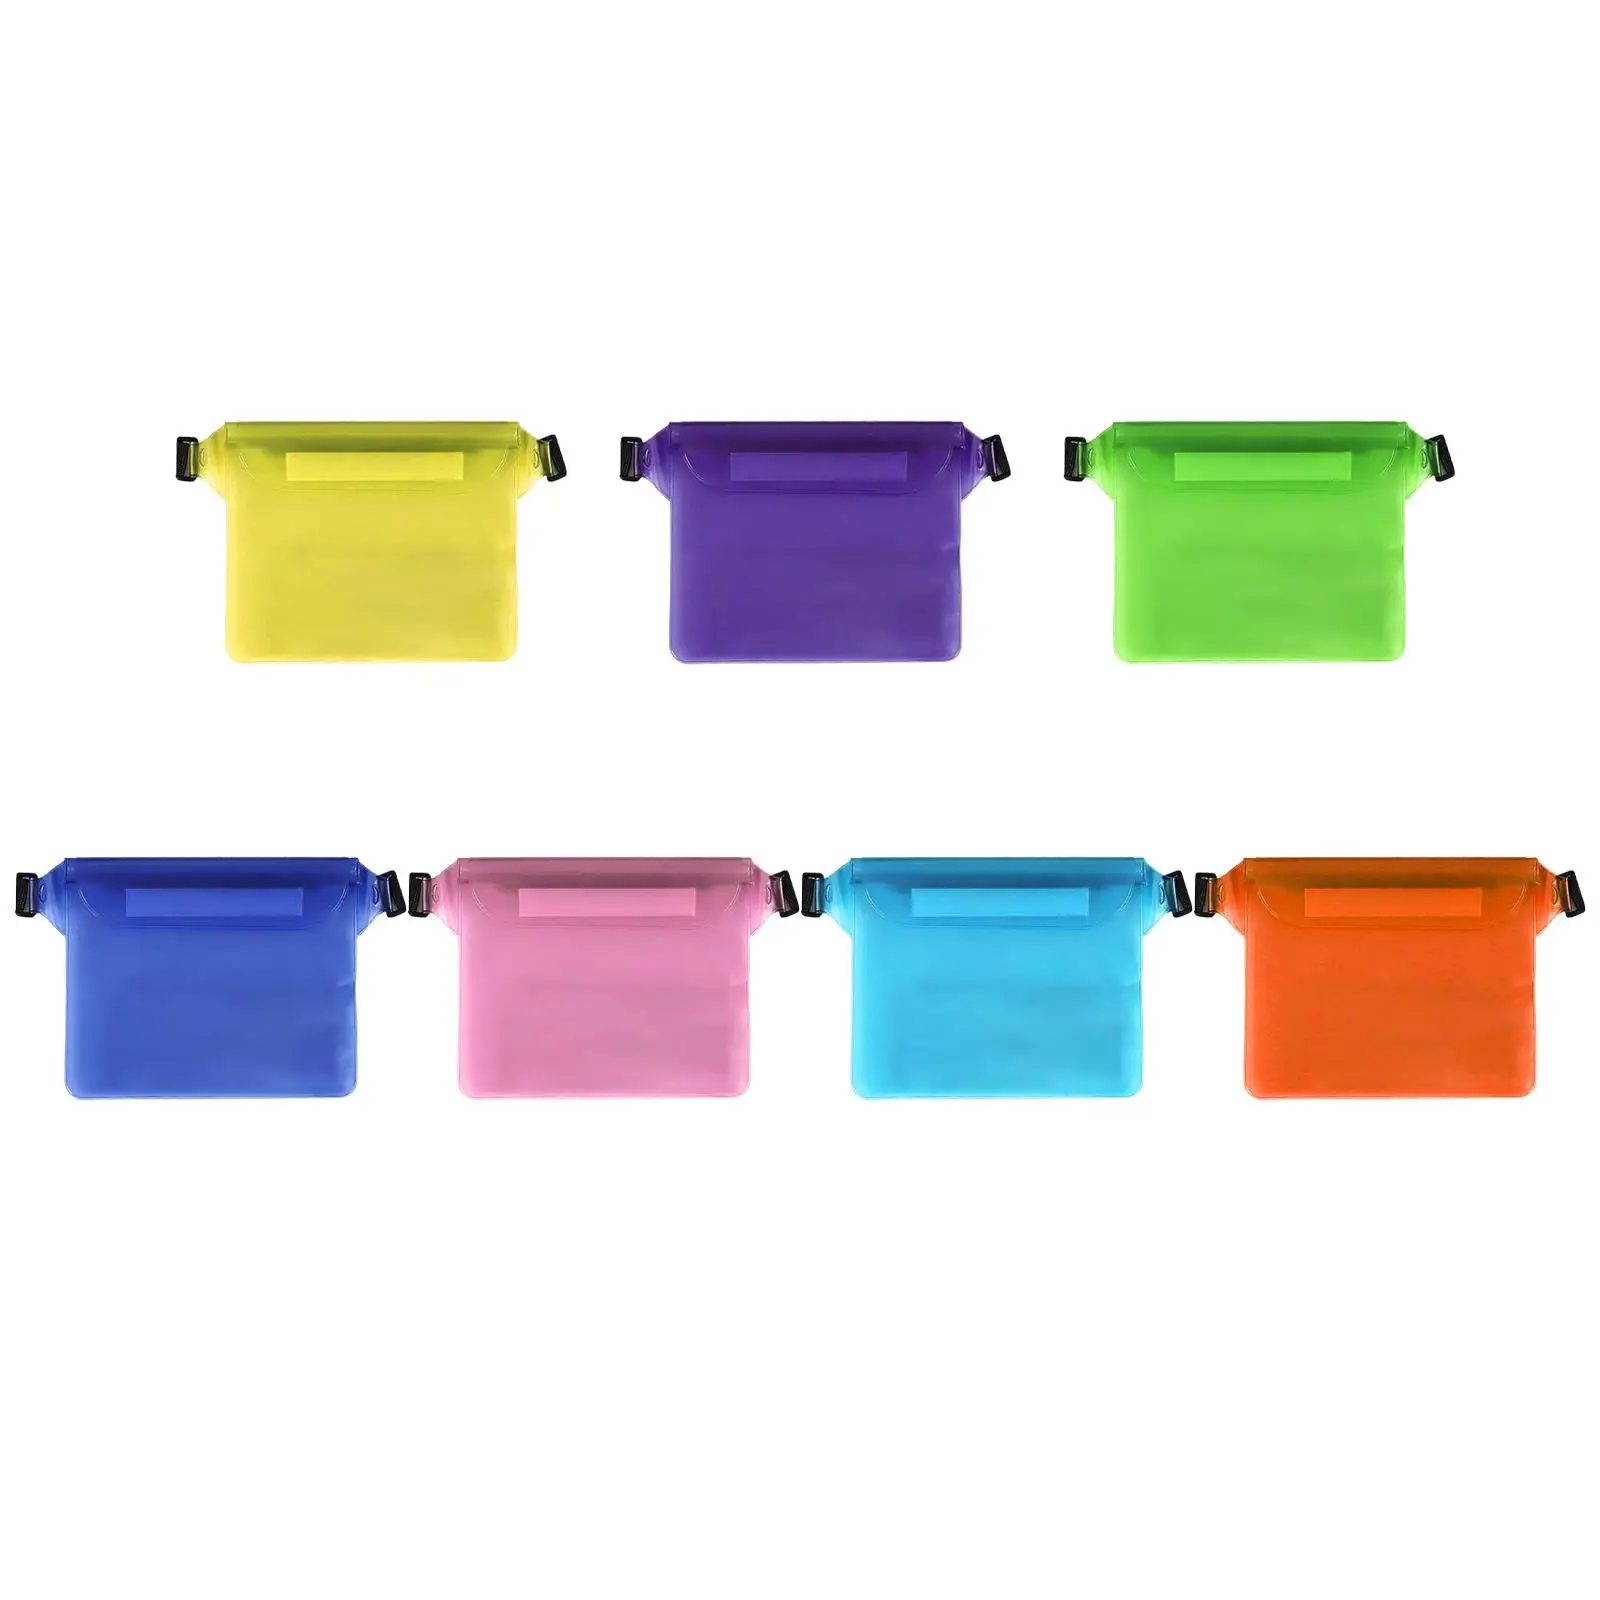 Clear Waterproof Bag Fashion Waist with Shoulder Strap Case Fanny Packs for Snorkeling Boating Swimming Beach Outdoor Activities